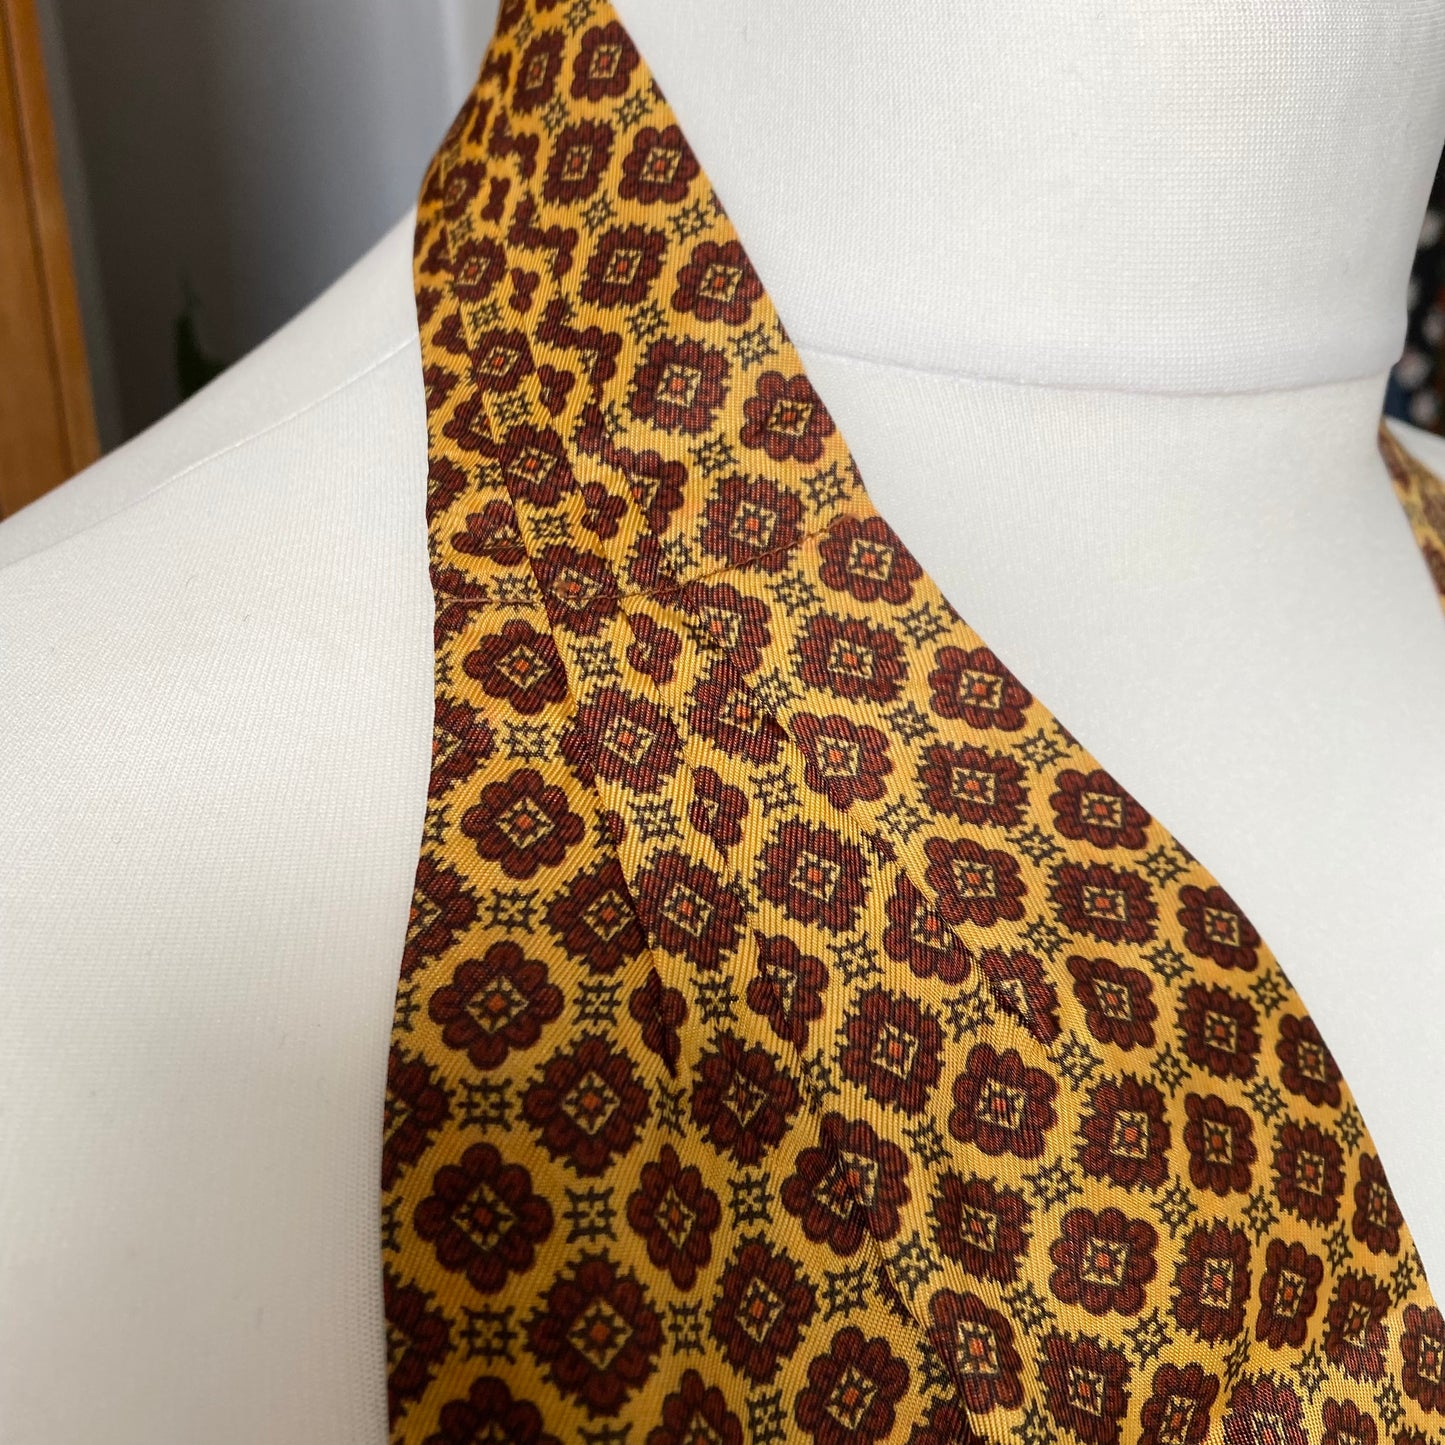 Mod style yellow, red and black abstract floral  print vintage cravat by British brand Duggie